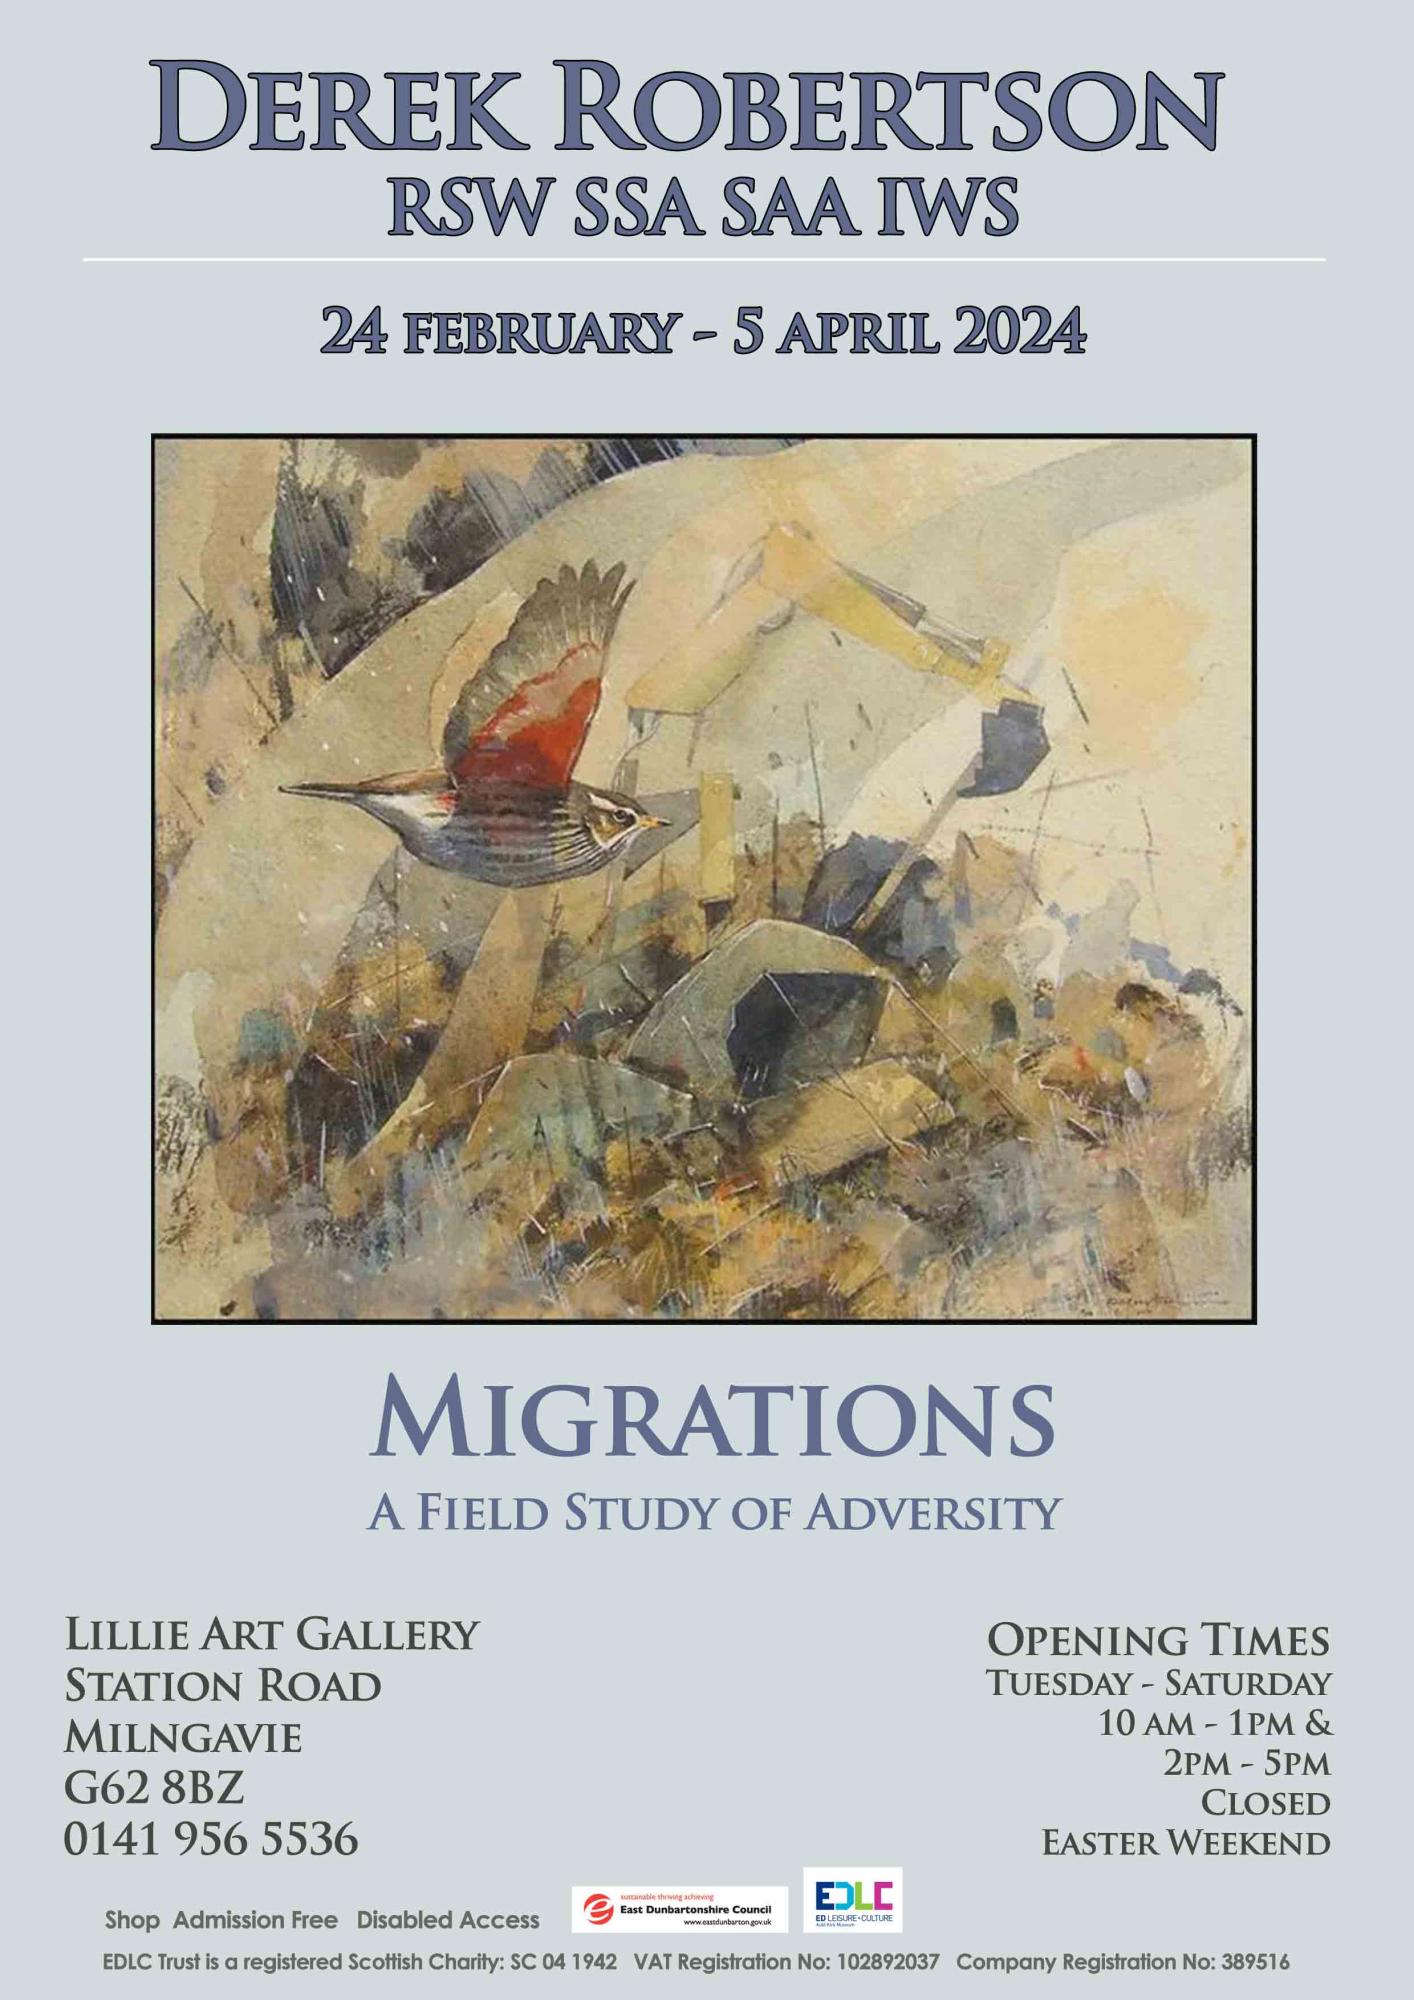 Poster advertising Derek Robertson exhibition at the Lillie Art Gallery - 24 February - 5 April 2024